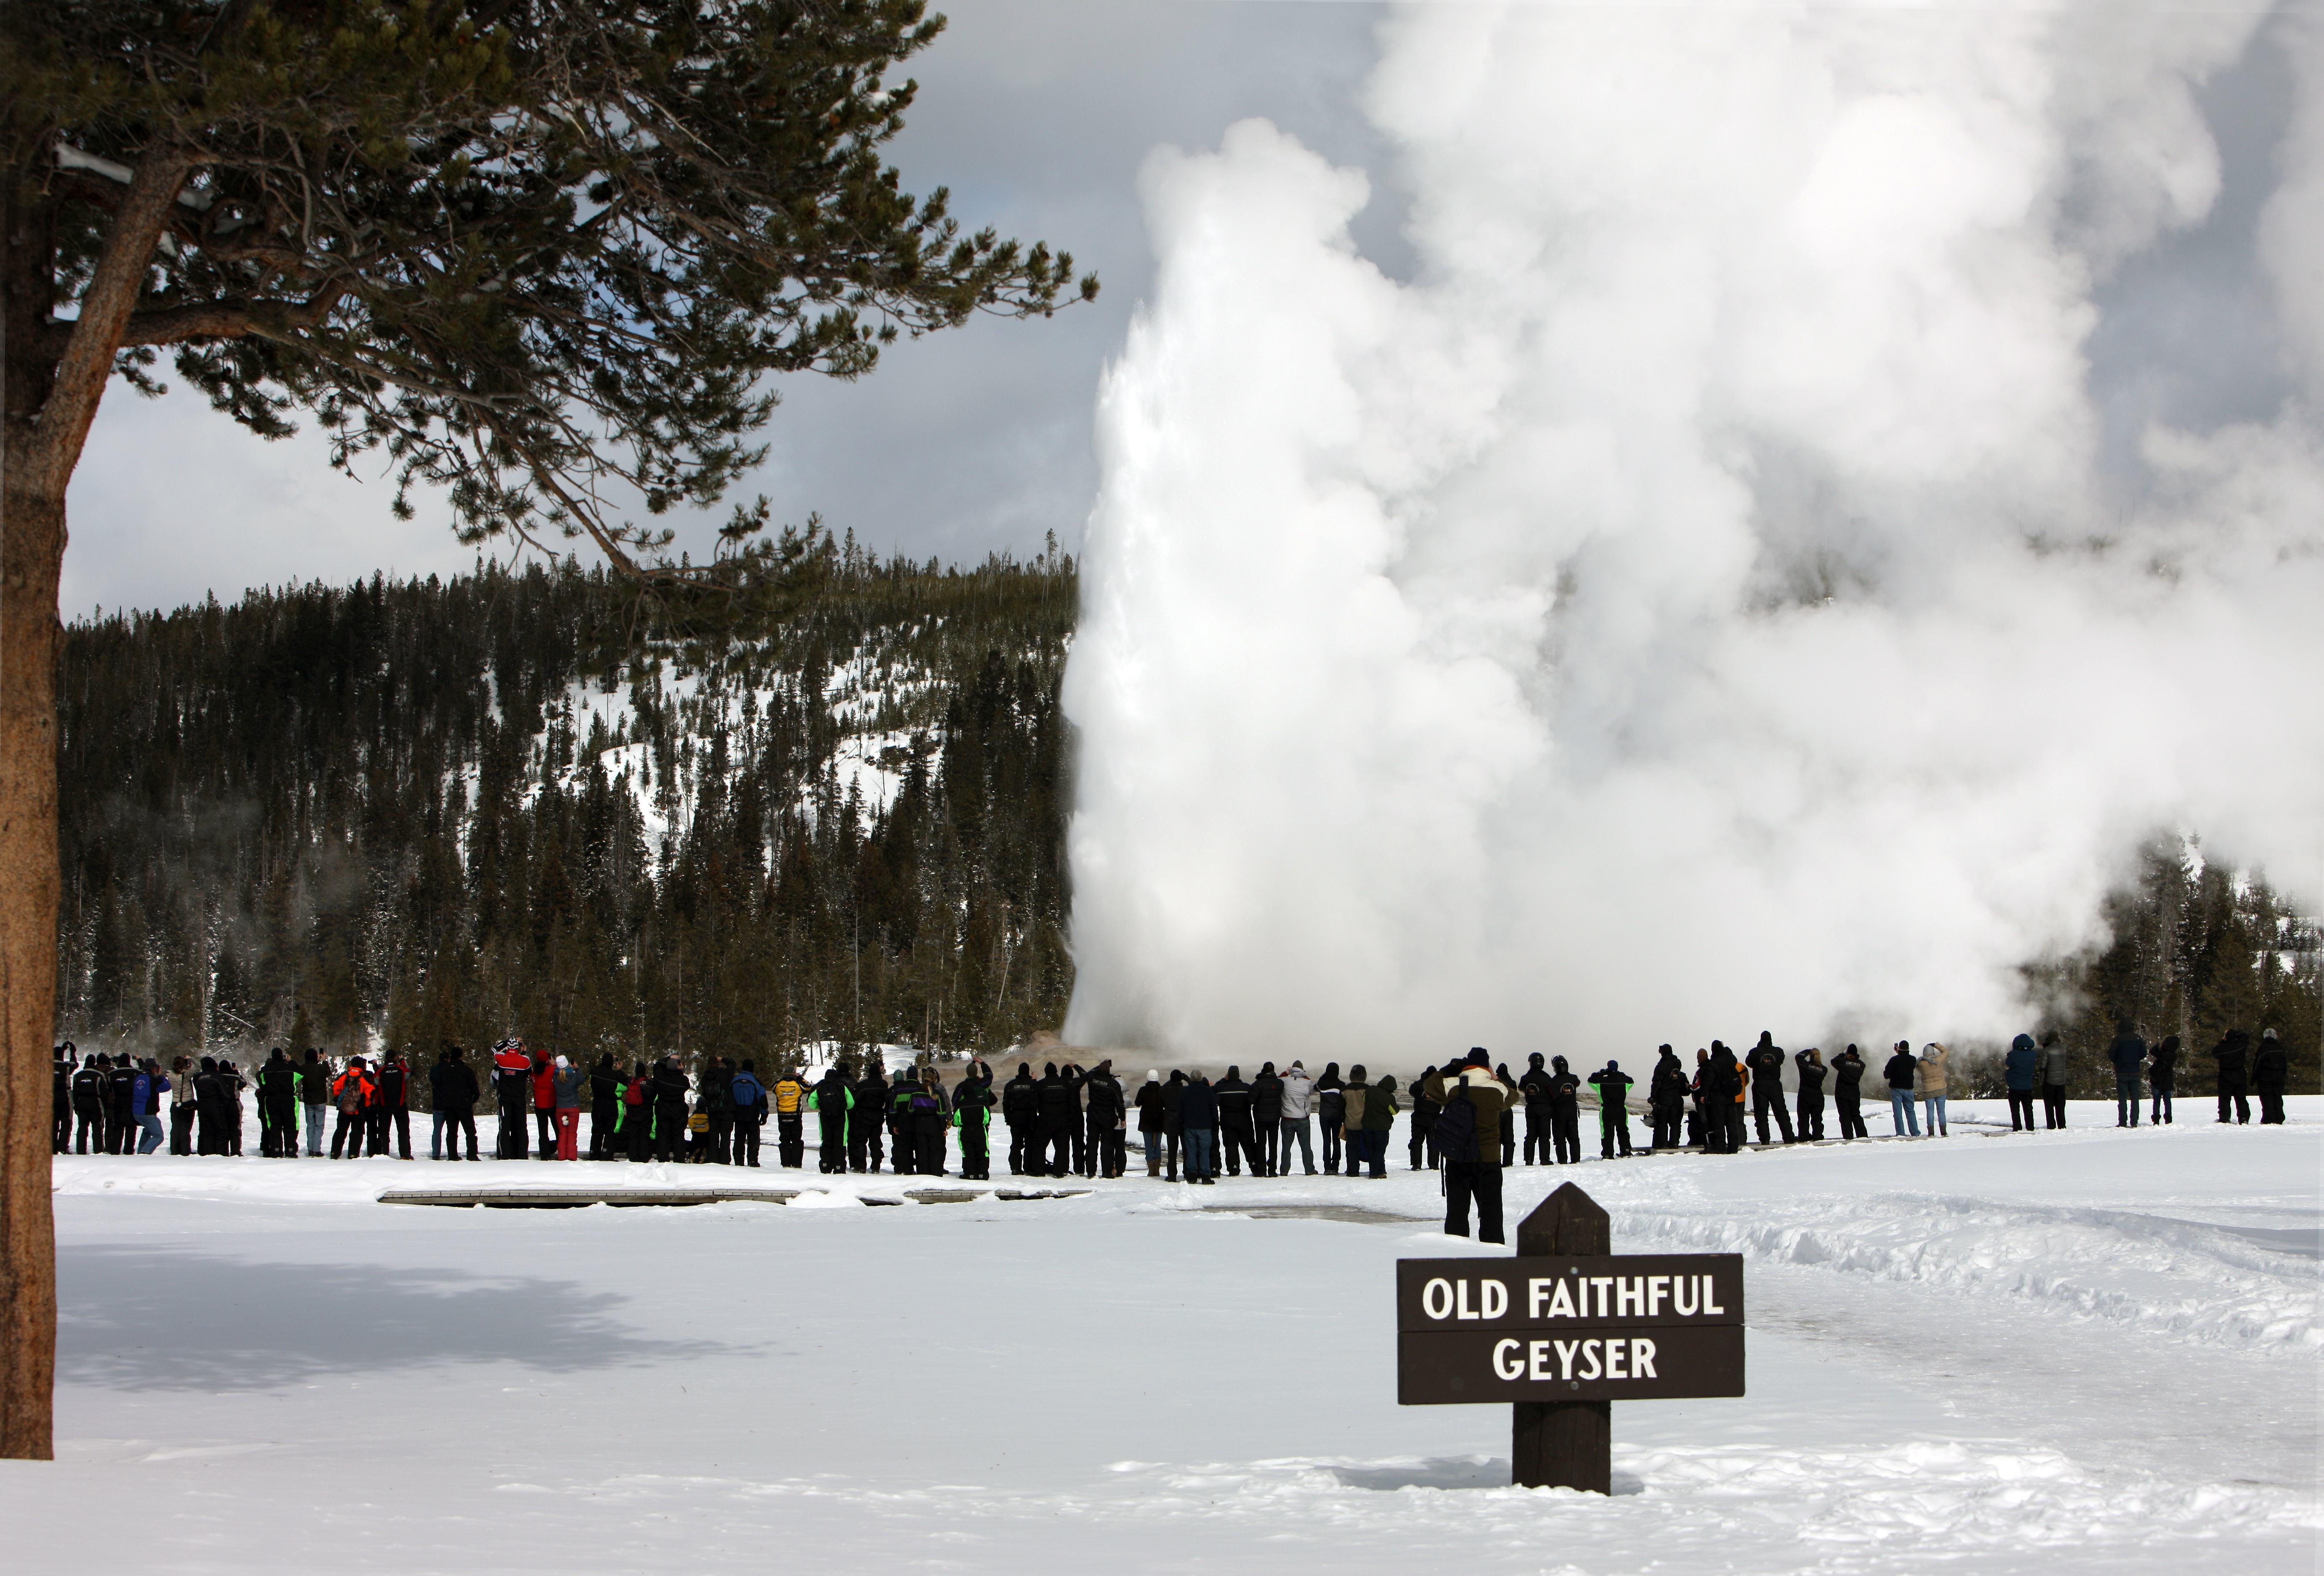 A crowd in front of an erupting geyser during a snowy winter day.